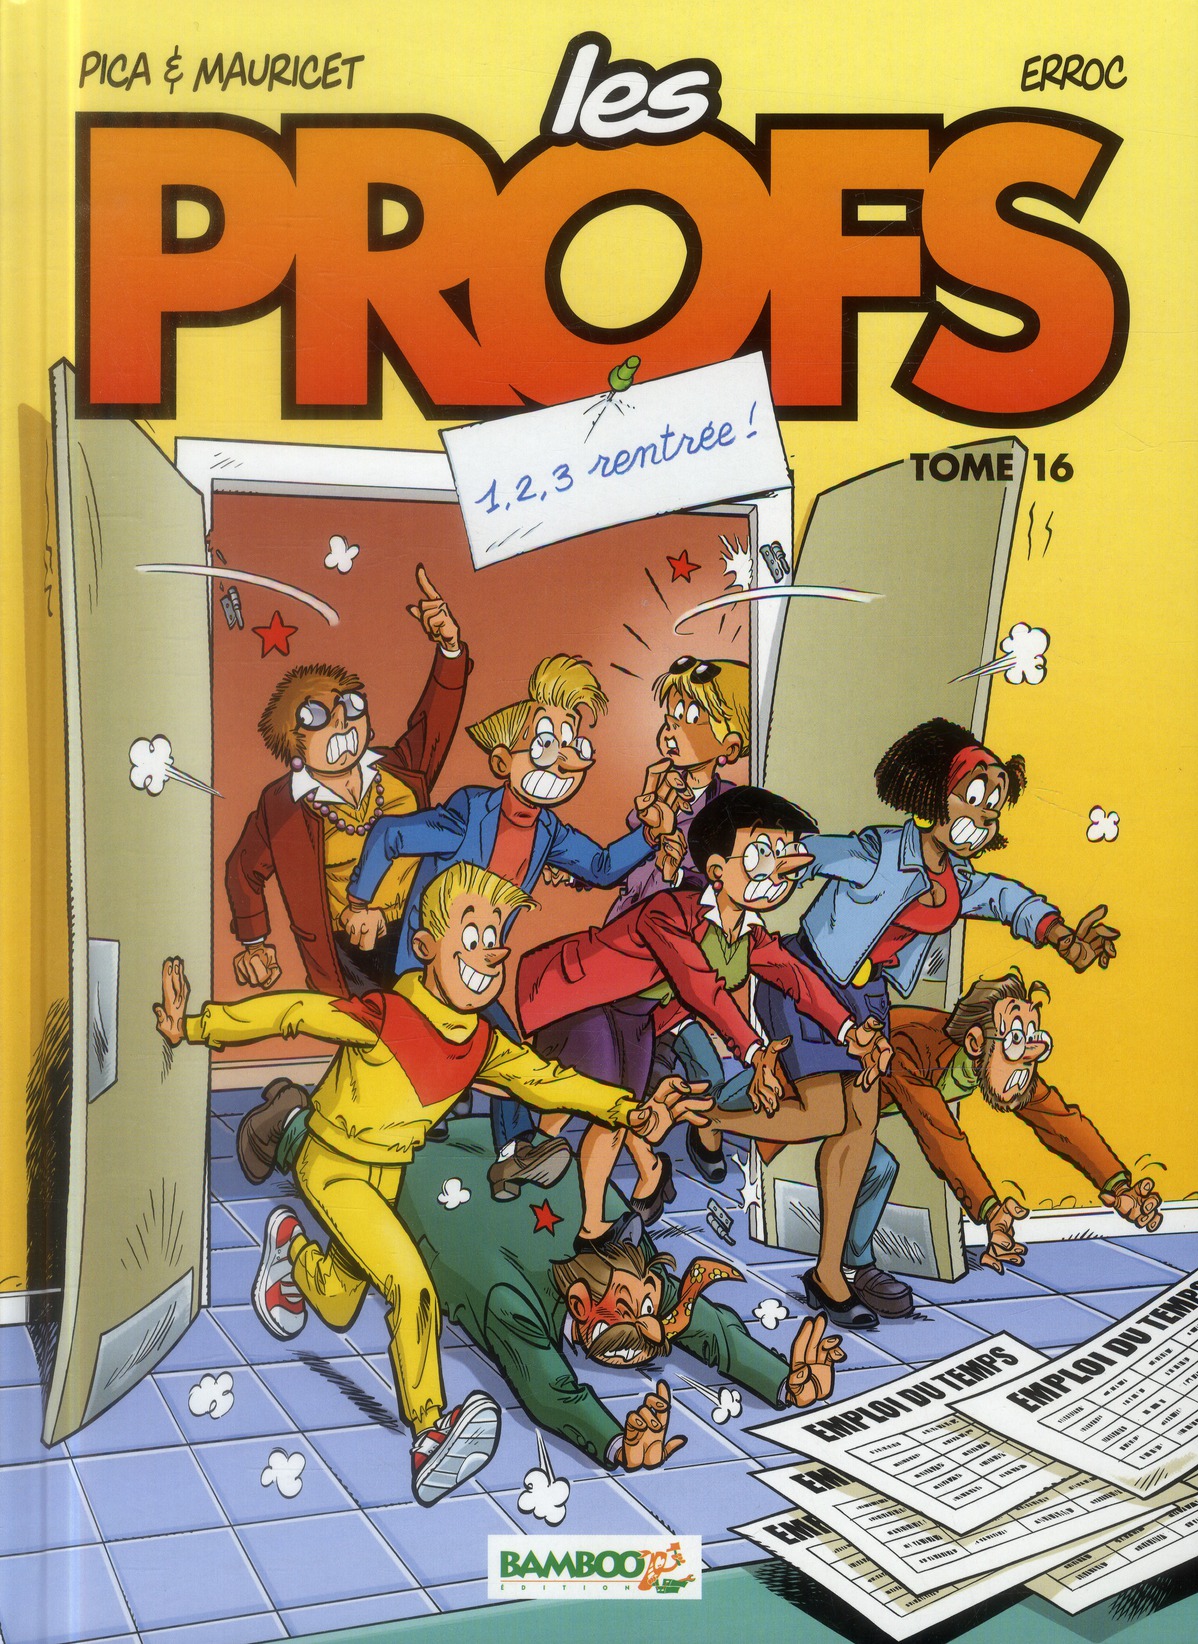 LES PROFS - TOME 16 - 1,2,3 RENTREE !